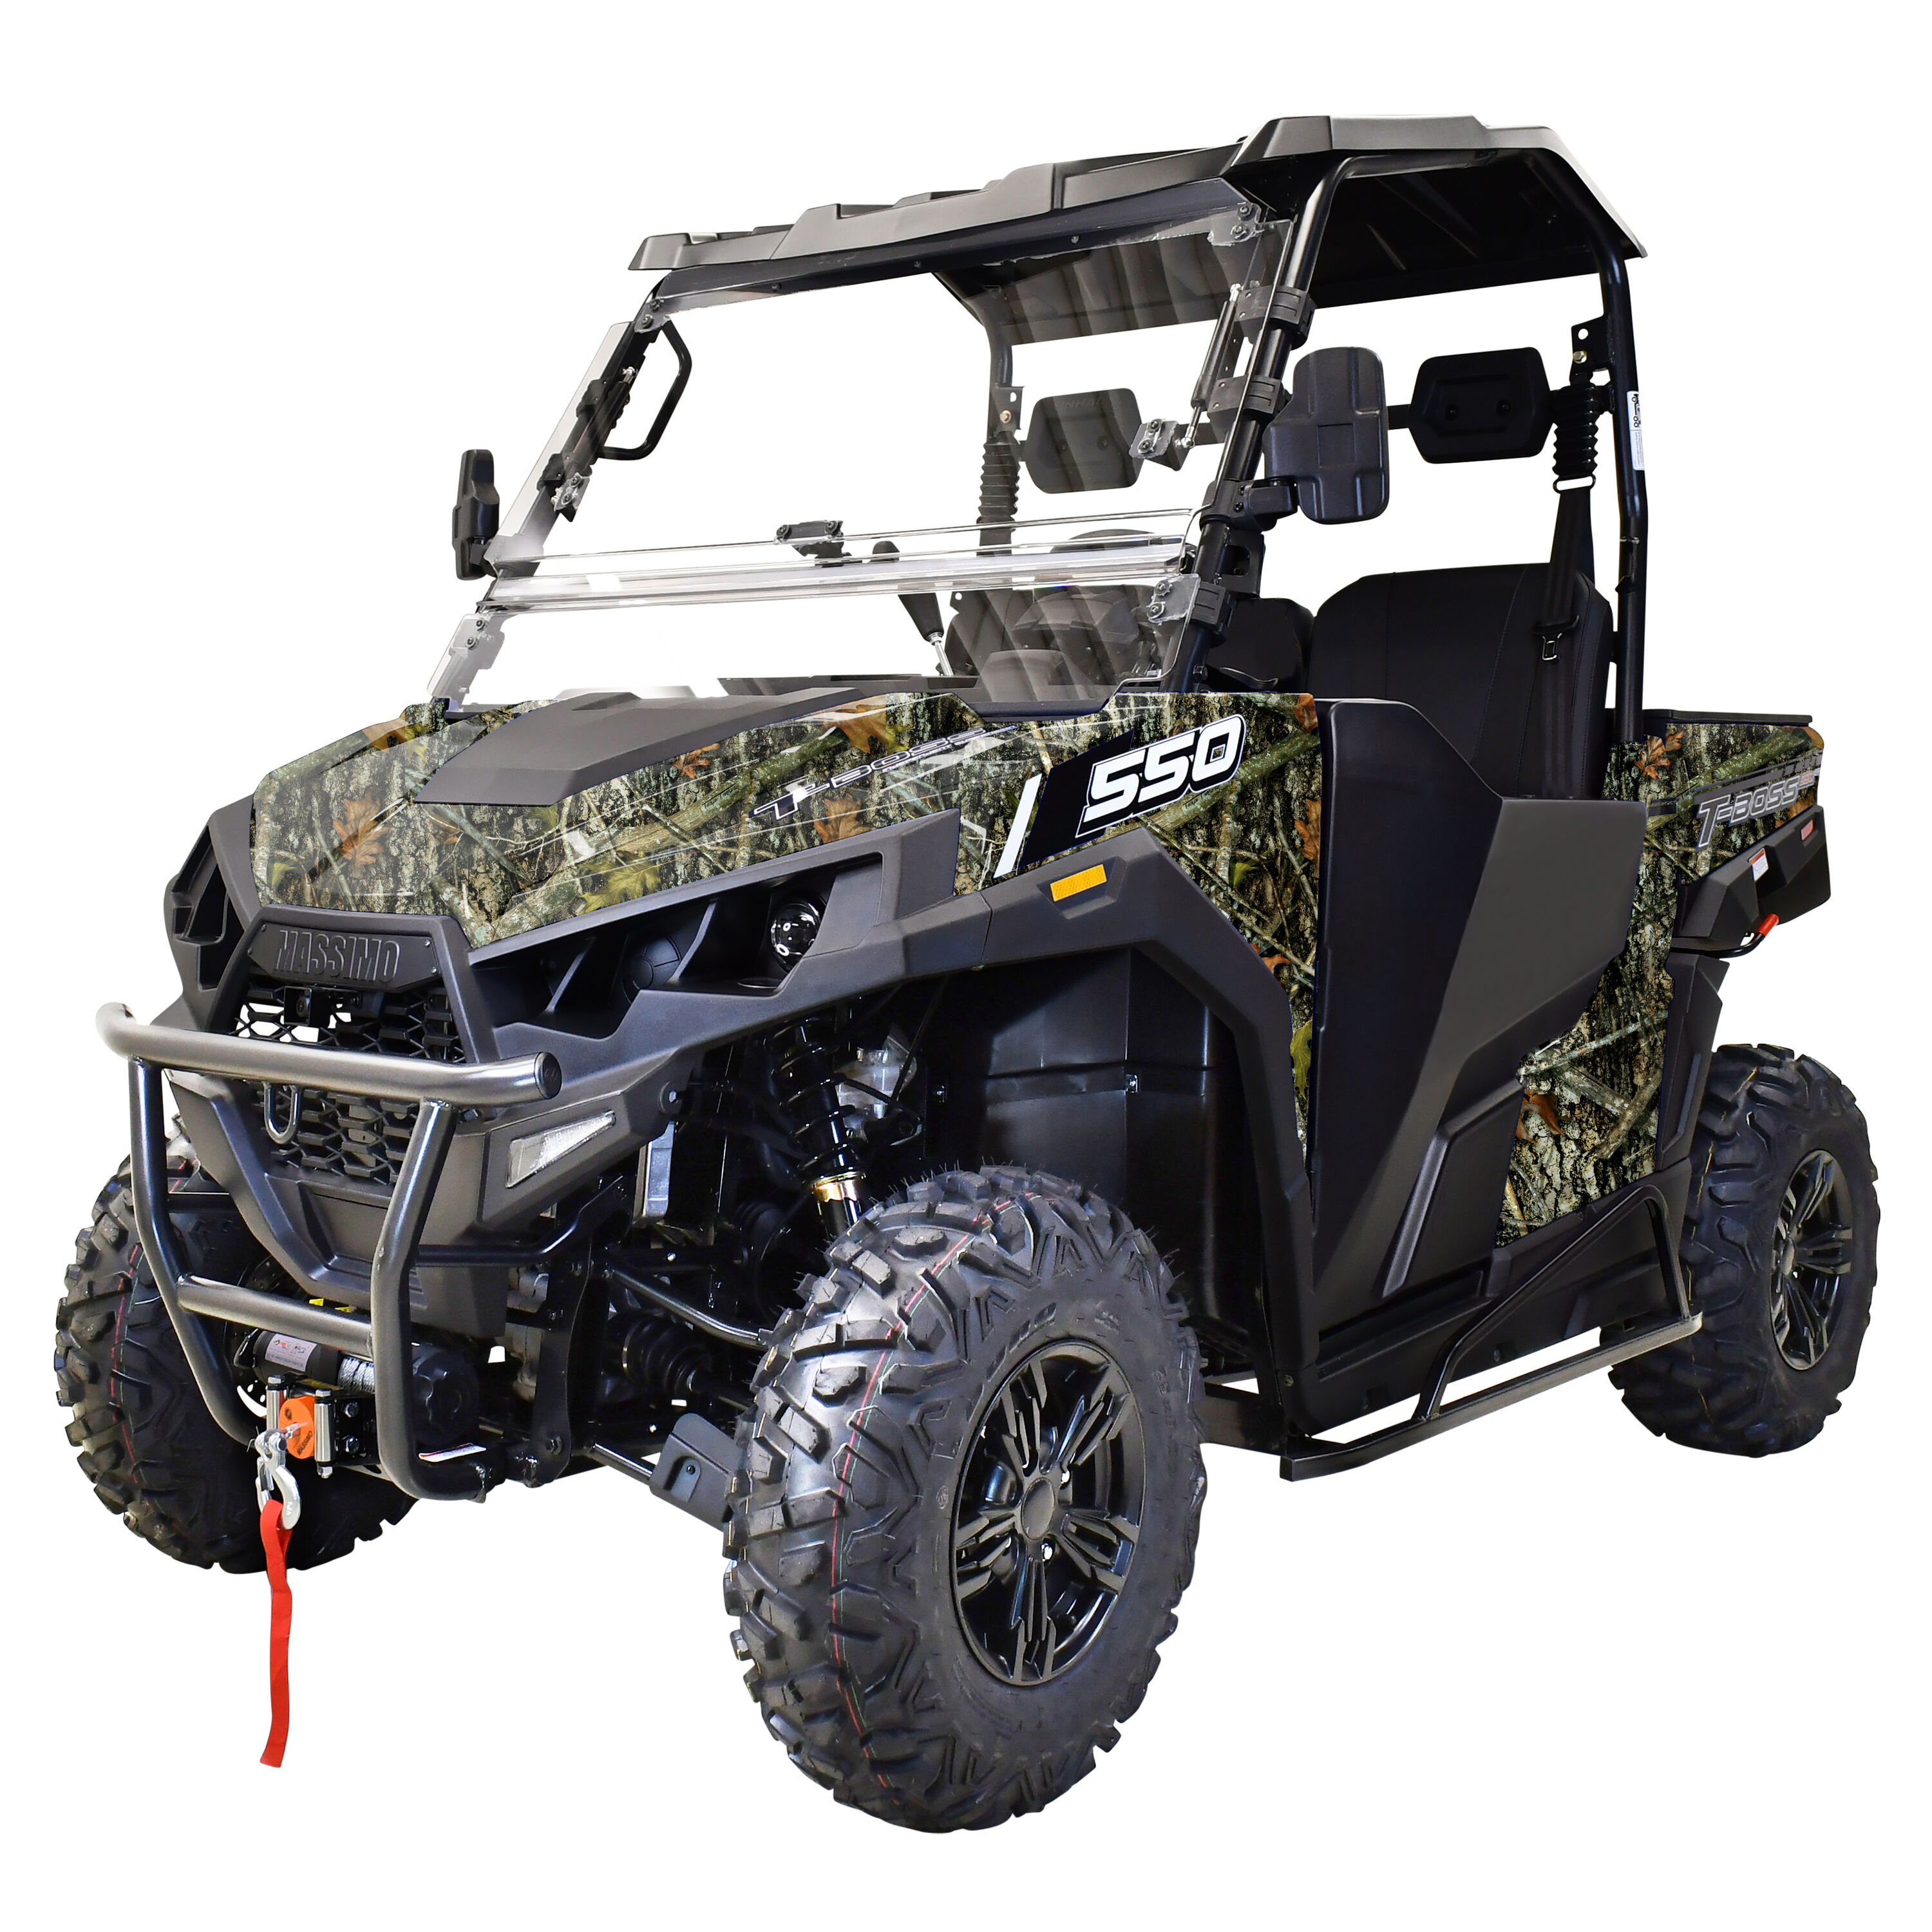 Massimo 33 HP Gas UTV with Tilting Cargo Bed and Windshield - Max